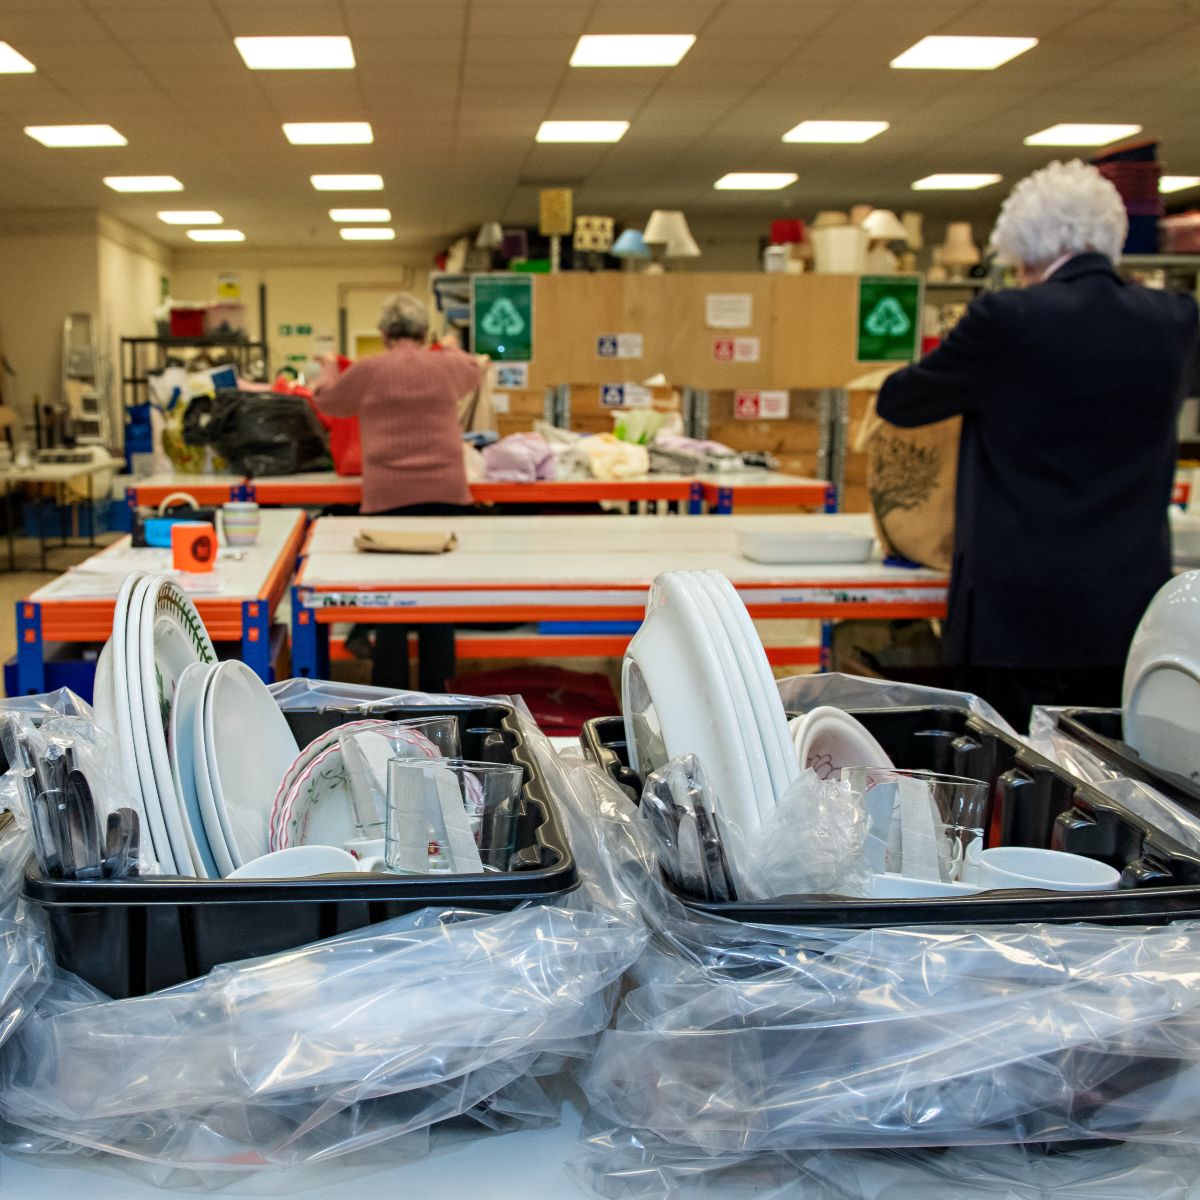 Two trays with plates and cutleries on a table. At the back of the picture are people working to put items into bags